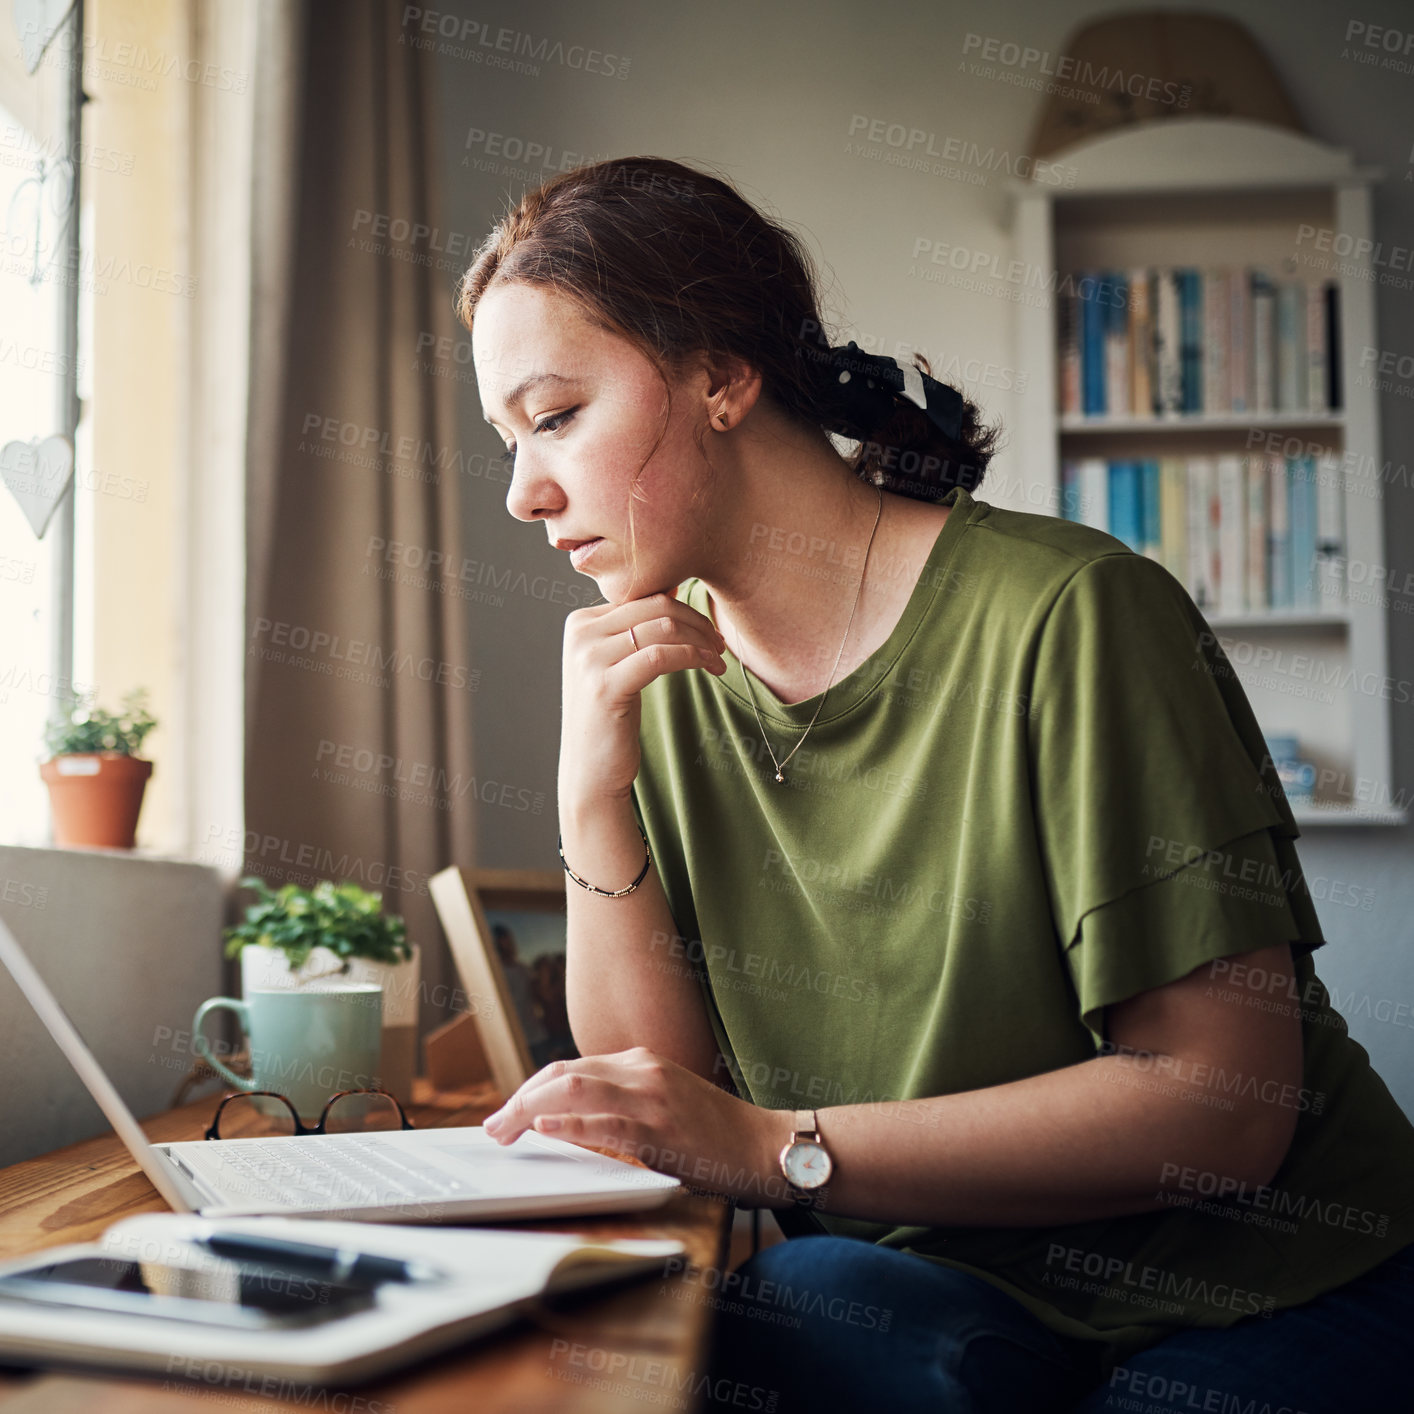 Buy stock photo Cropped shot of an attractive young businesswoman sitting alone in her home office and looking contemplative while using her laptop